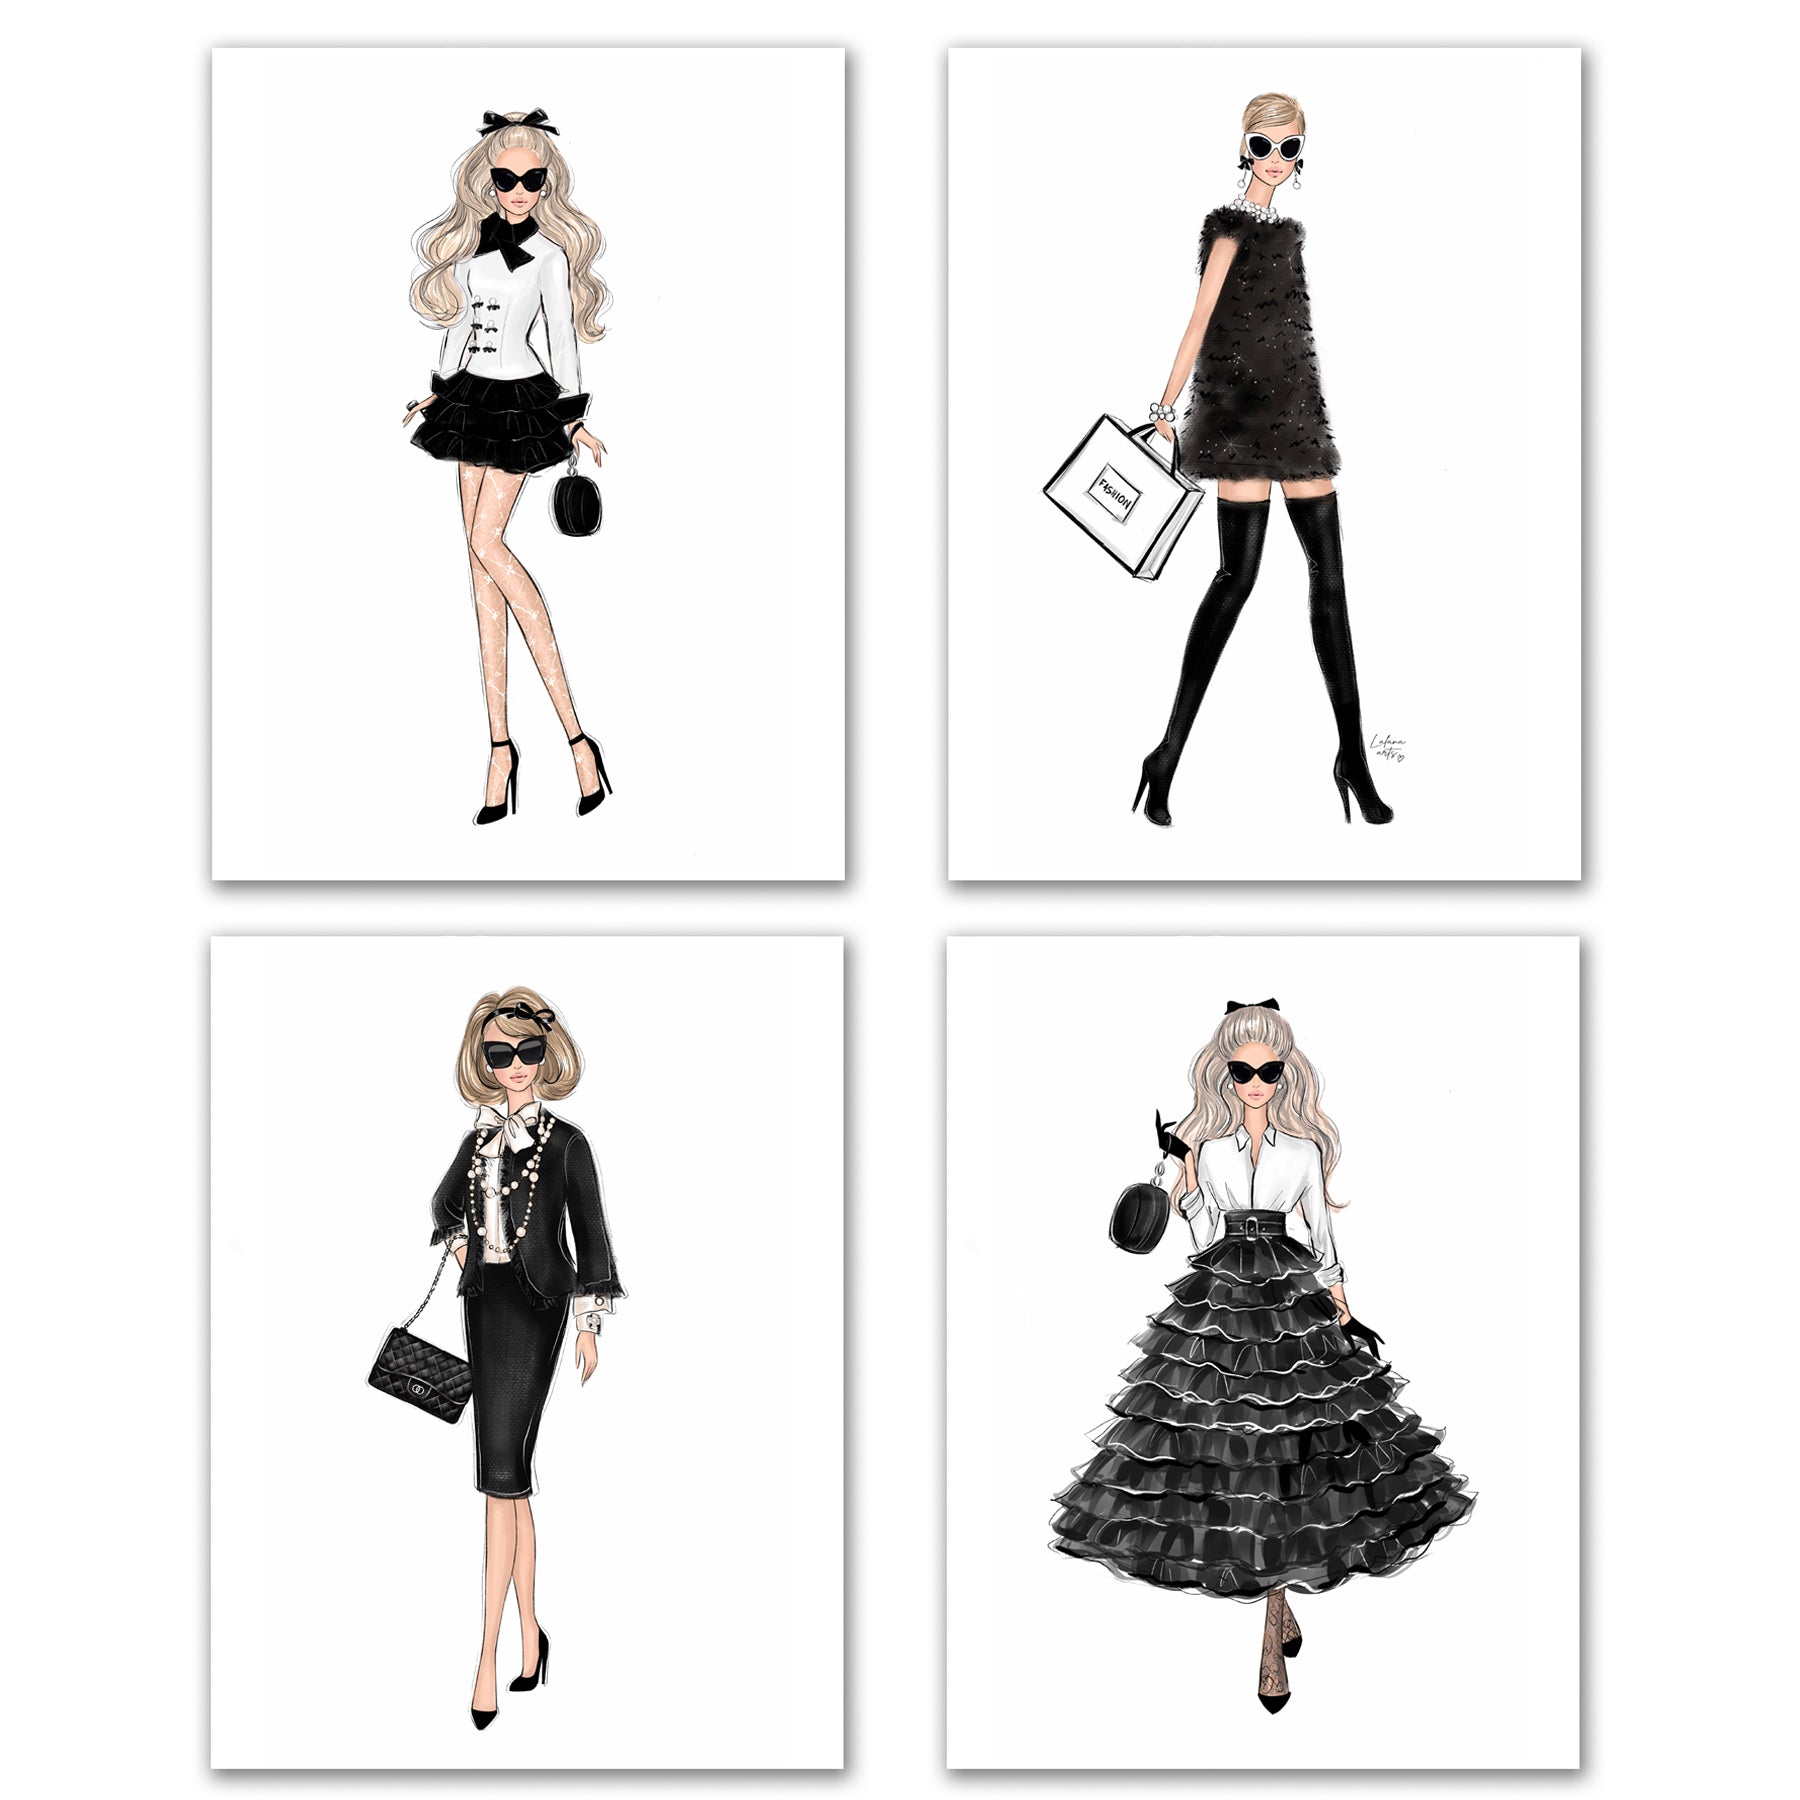 SET OF 4 ART PRINTS girly fashion illustrations in black and white tones